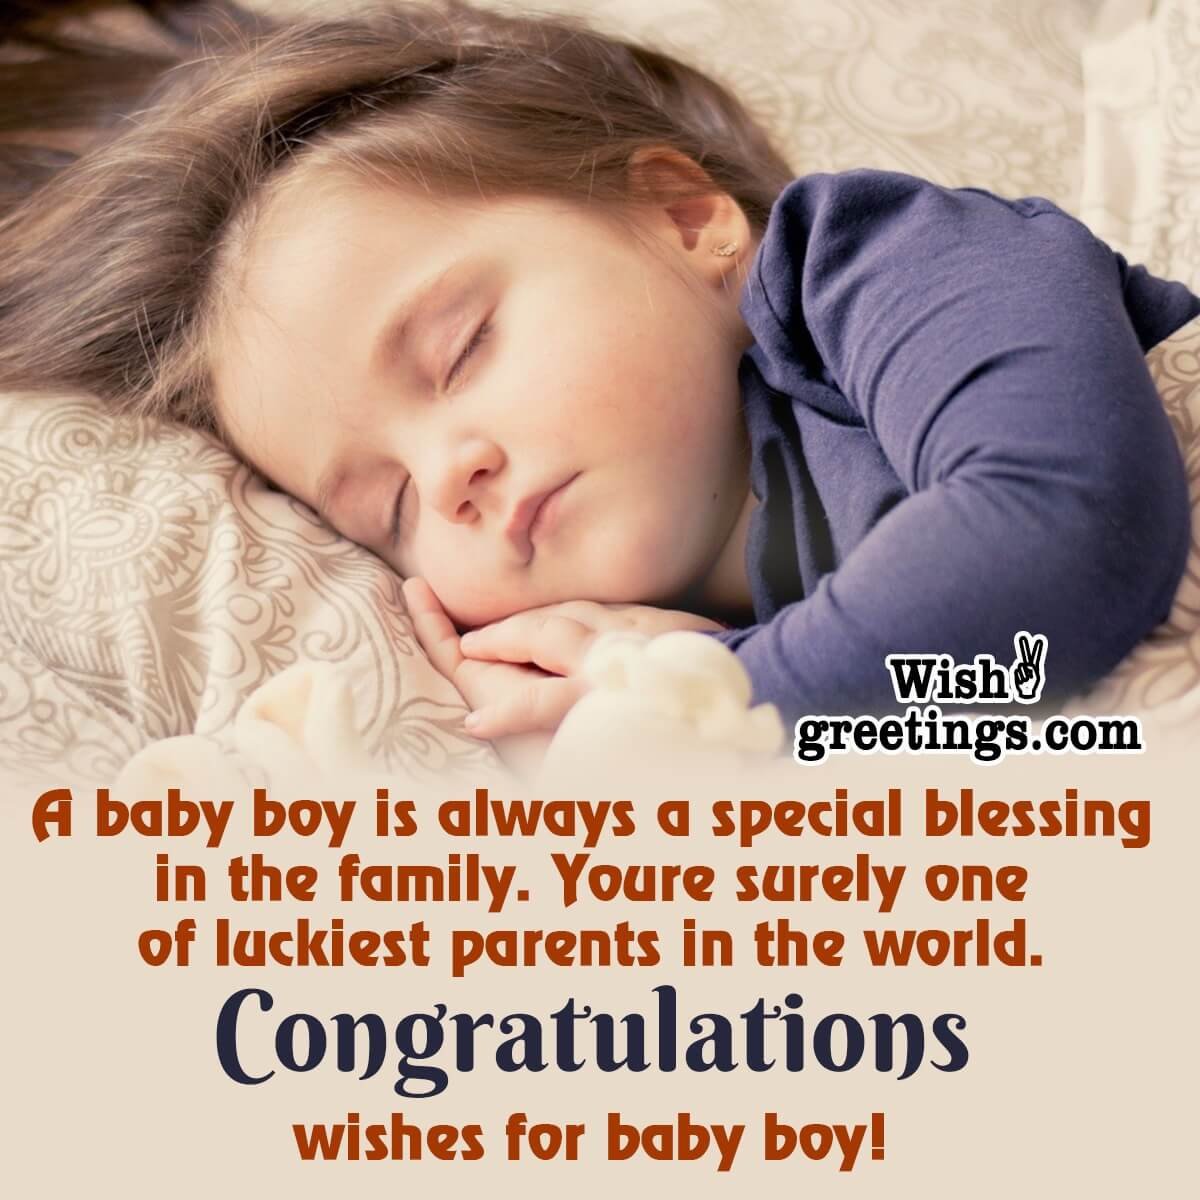 Congratulations Messages for Baby Boy - Wish Greetings